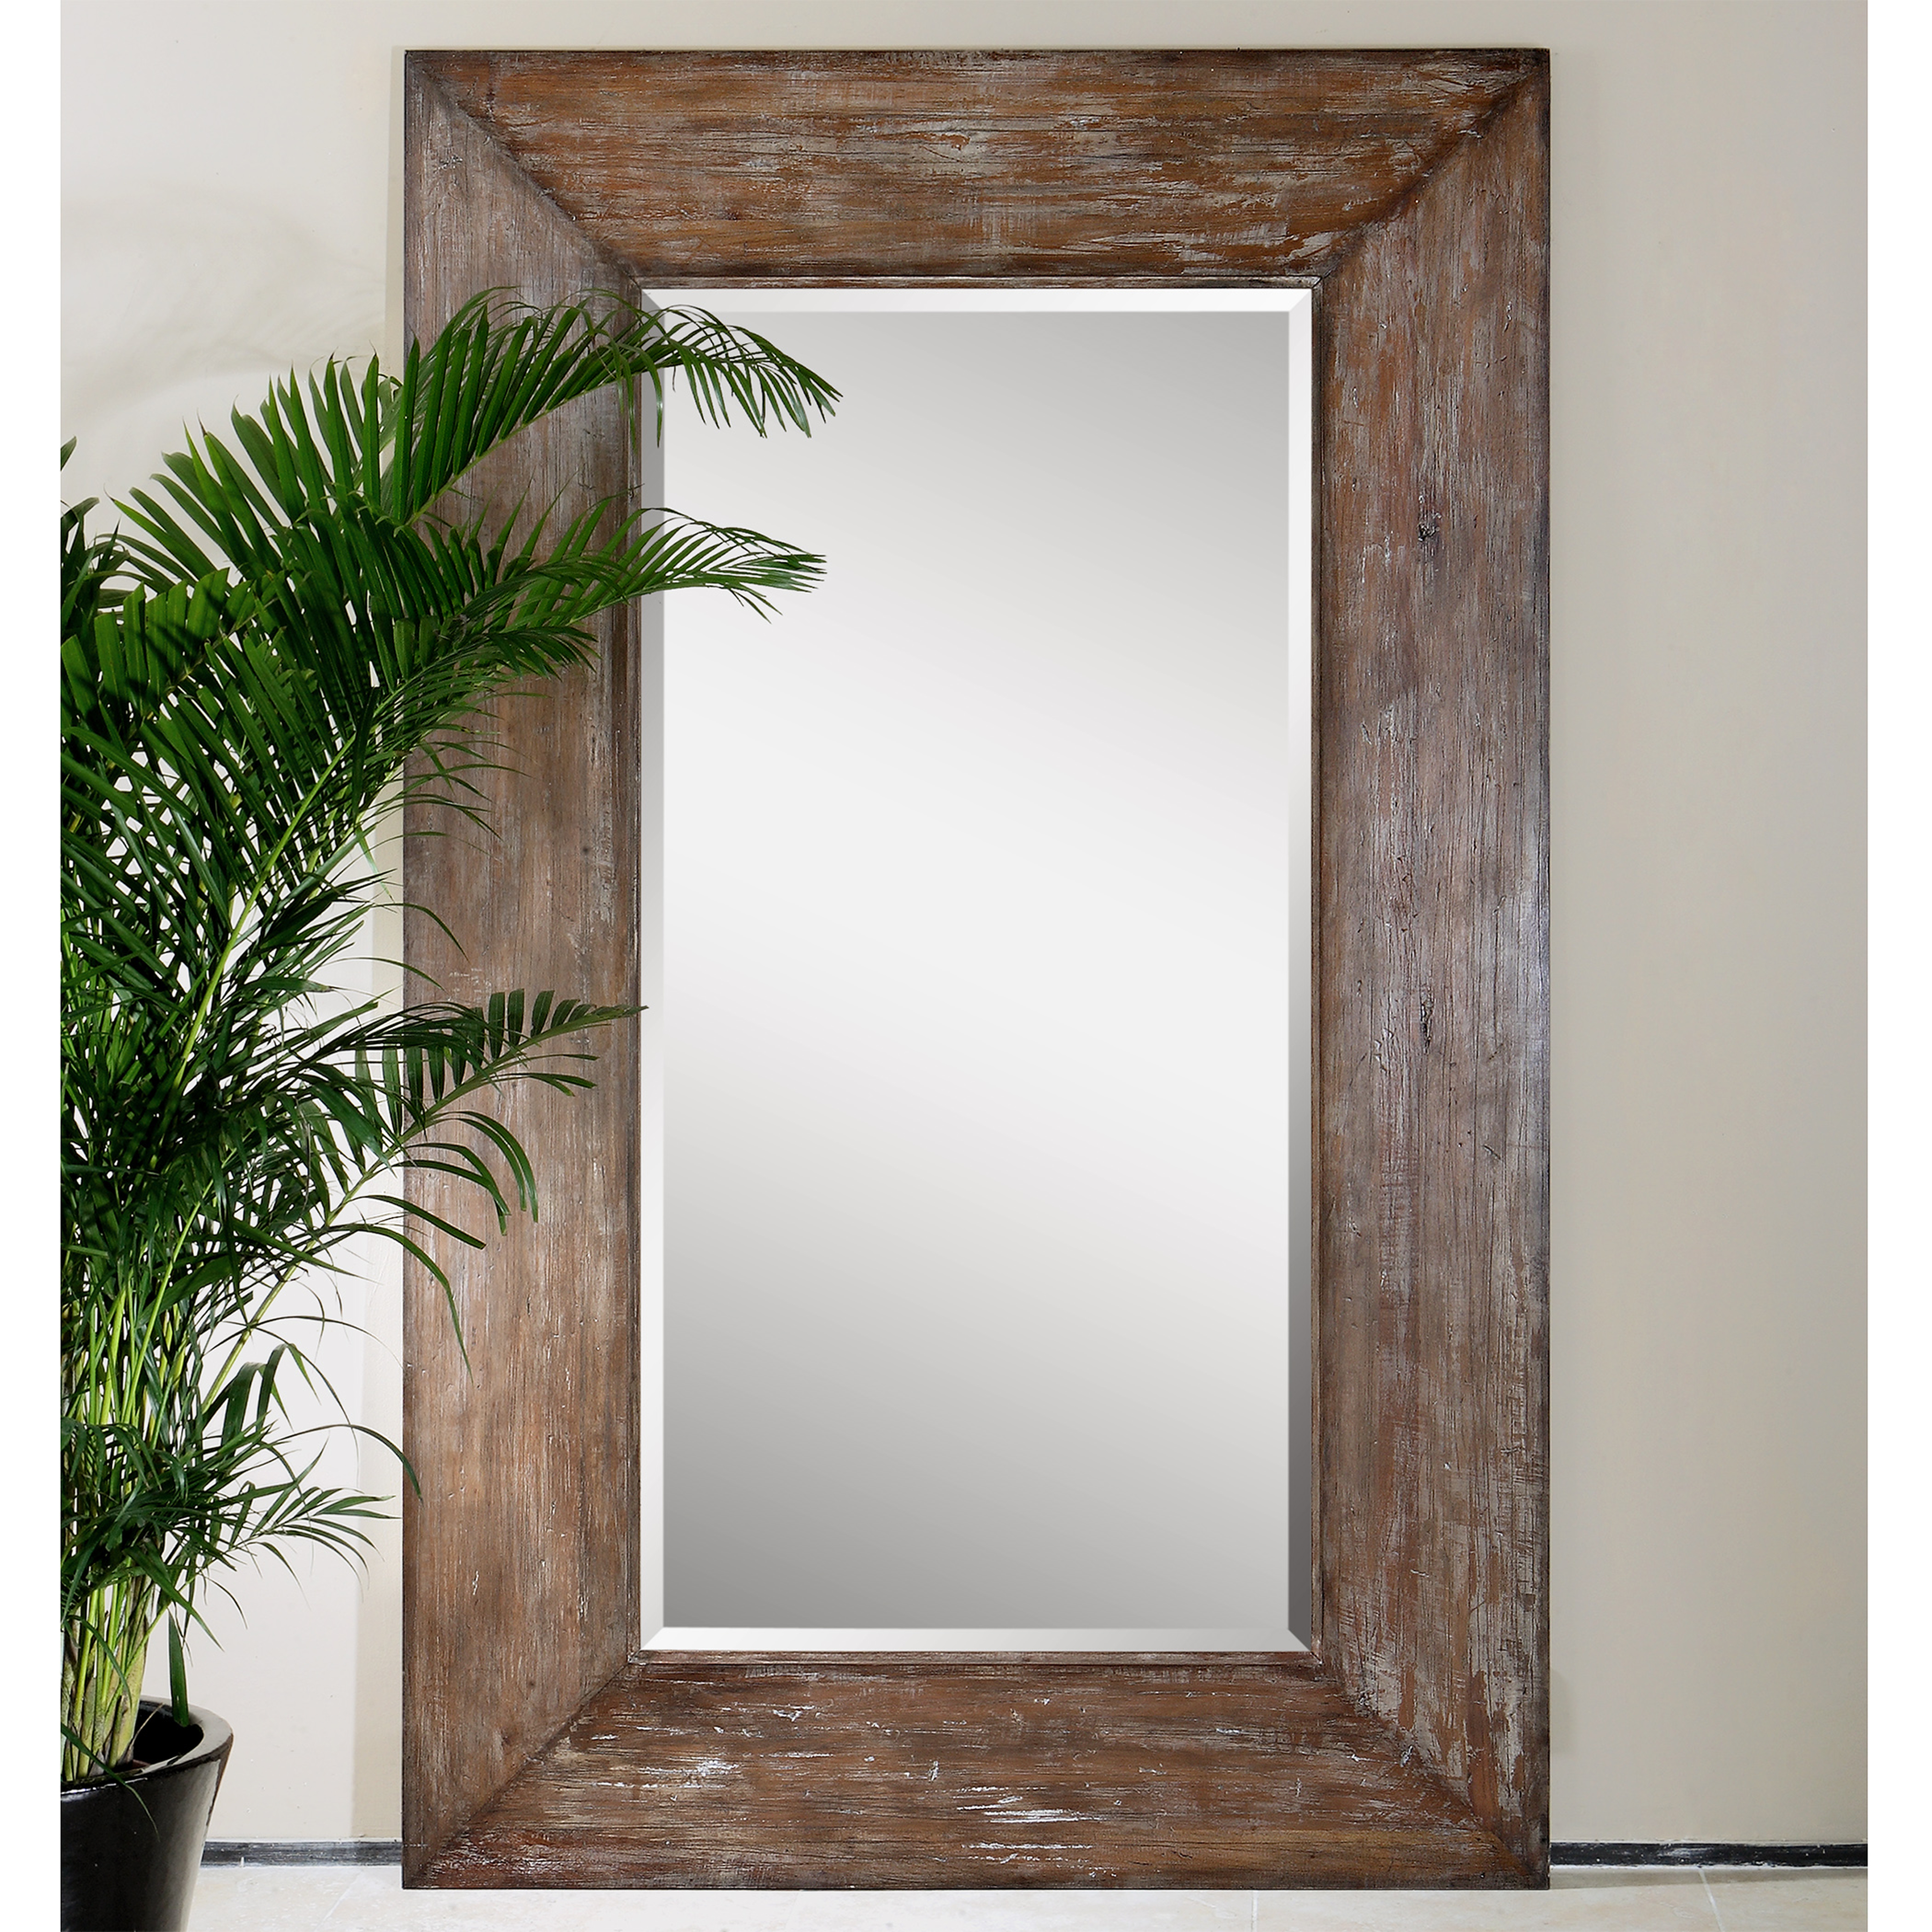 Langford Large Wood Mirror Floor & Wall - Hudsonhill Foundry